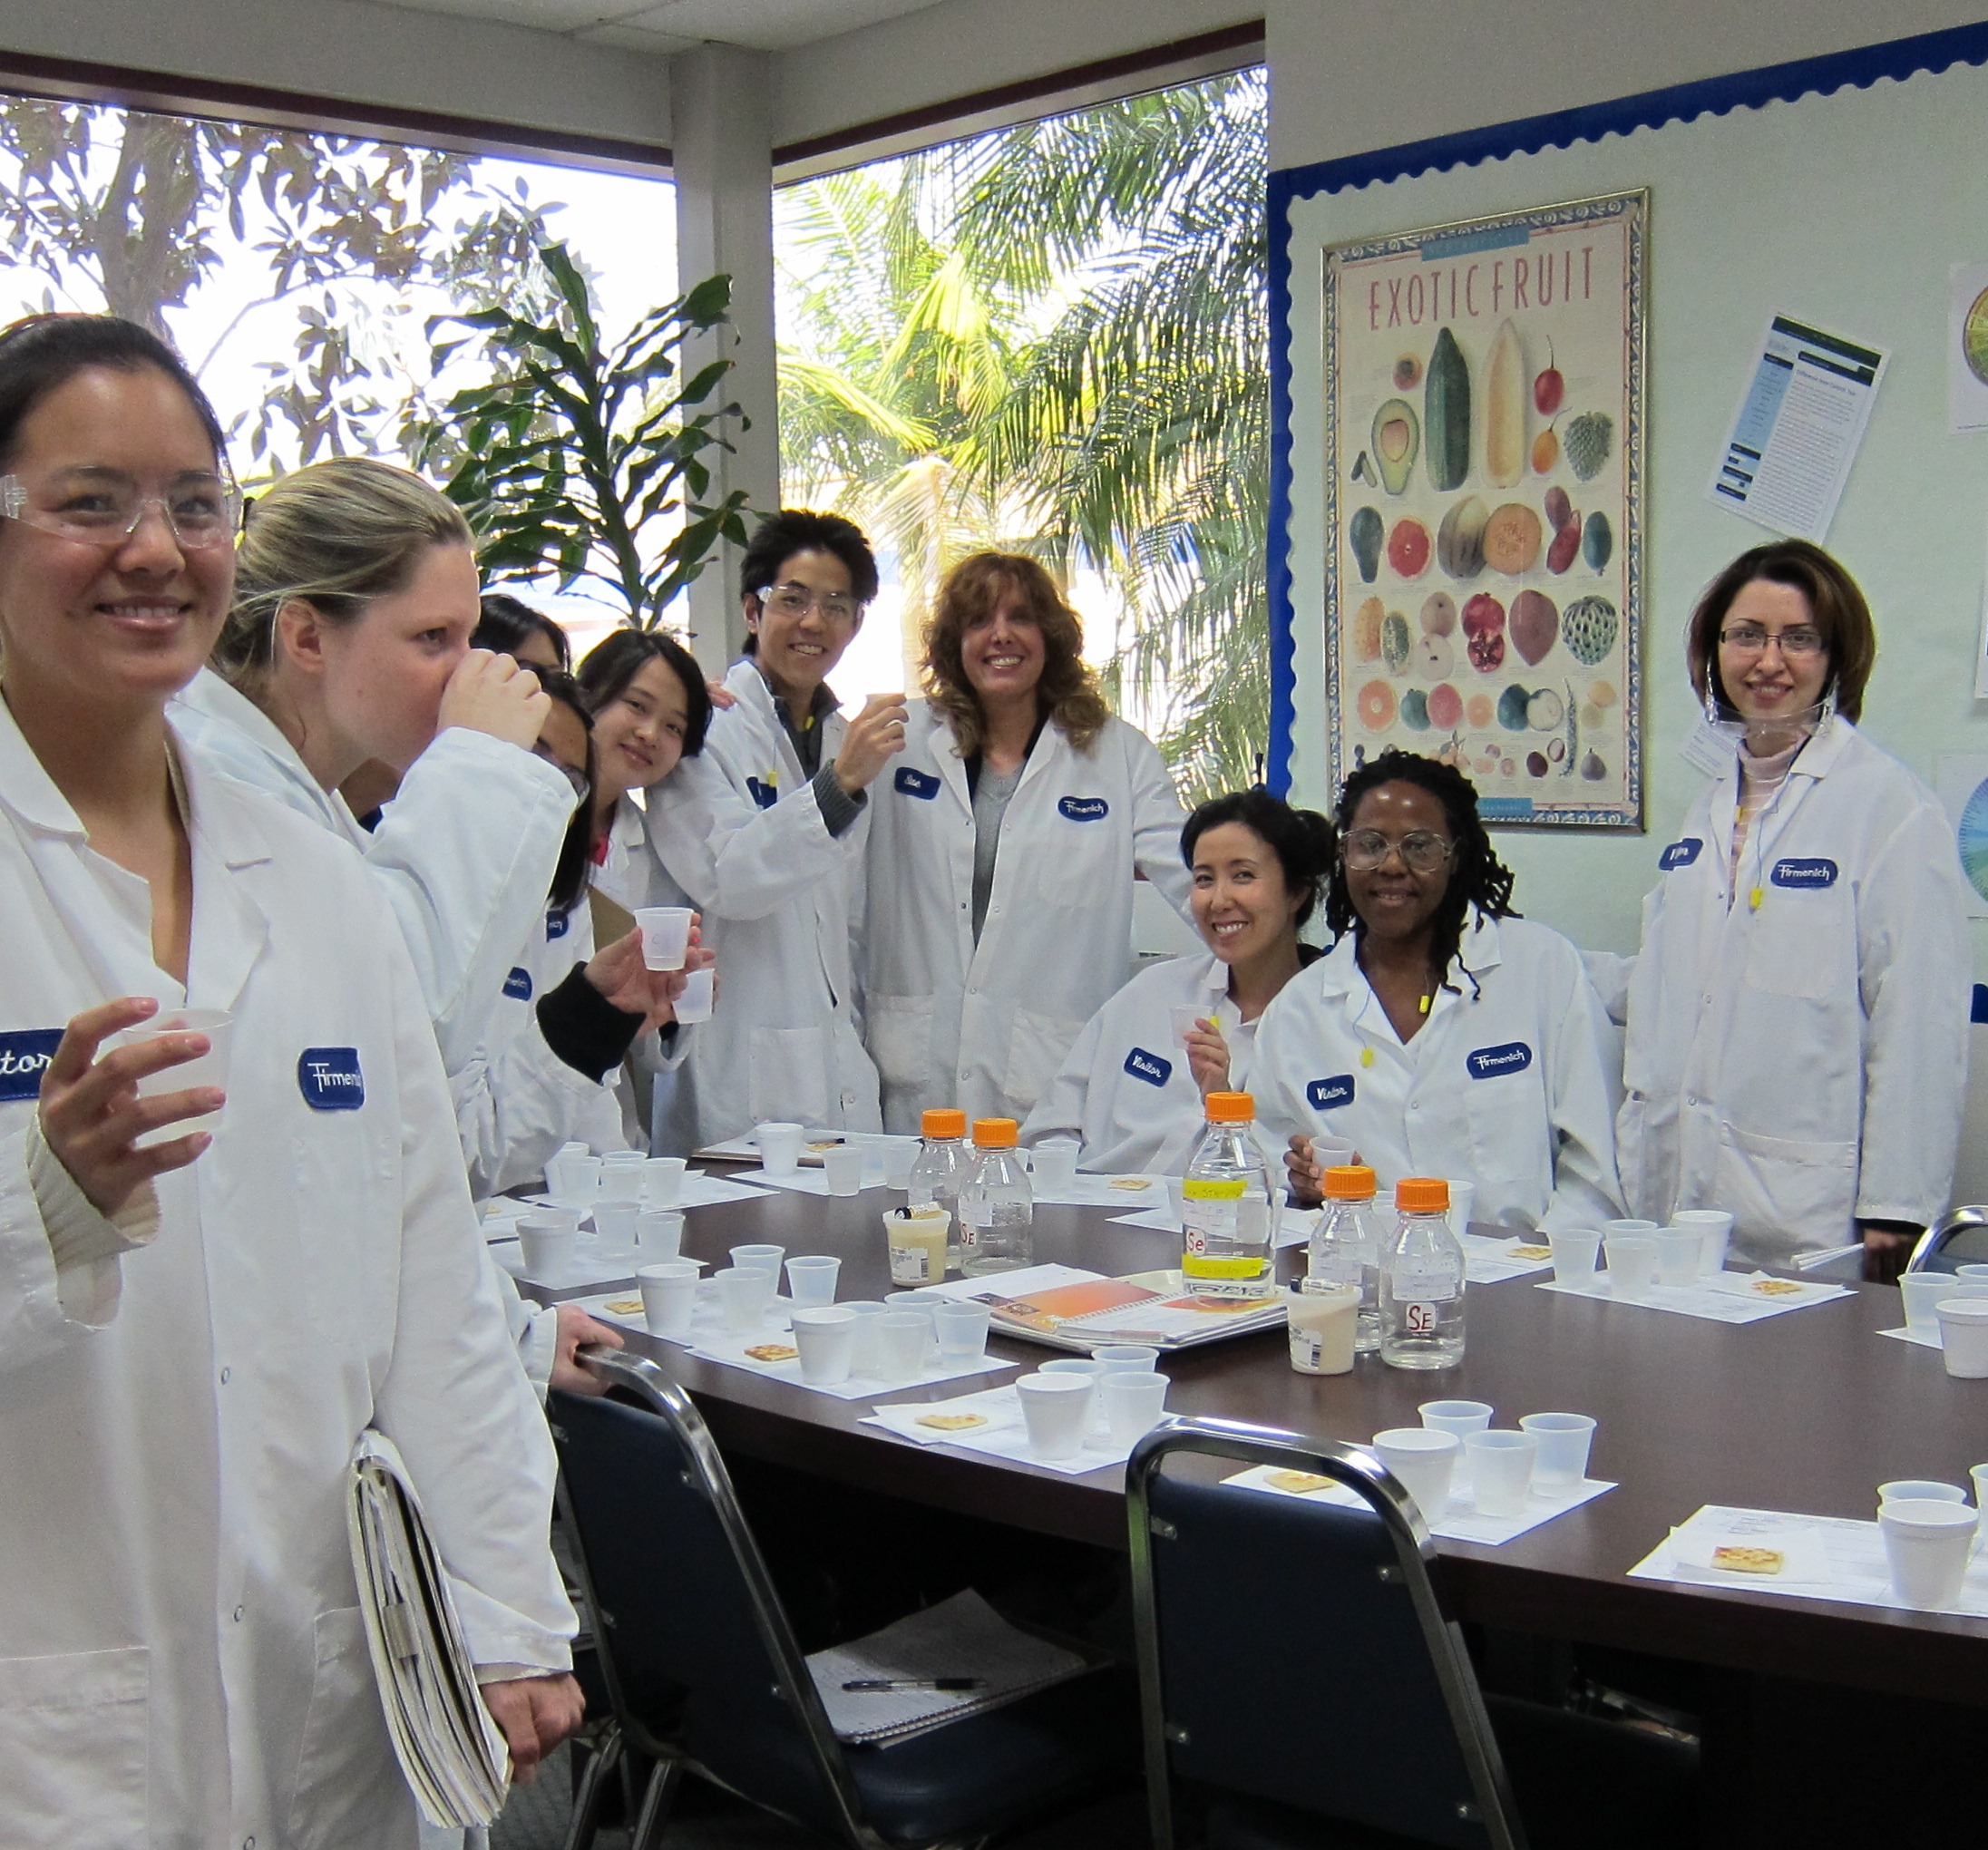 Food science students are treated to a product tasting